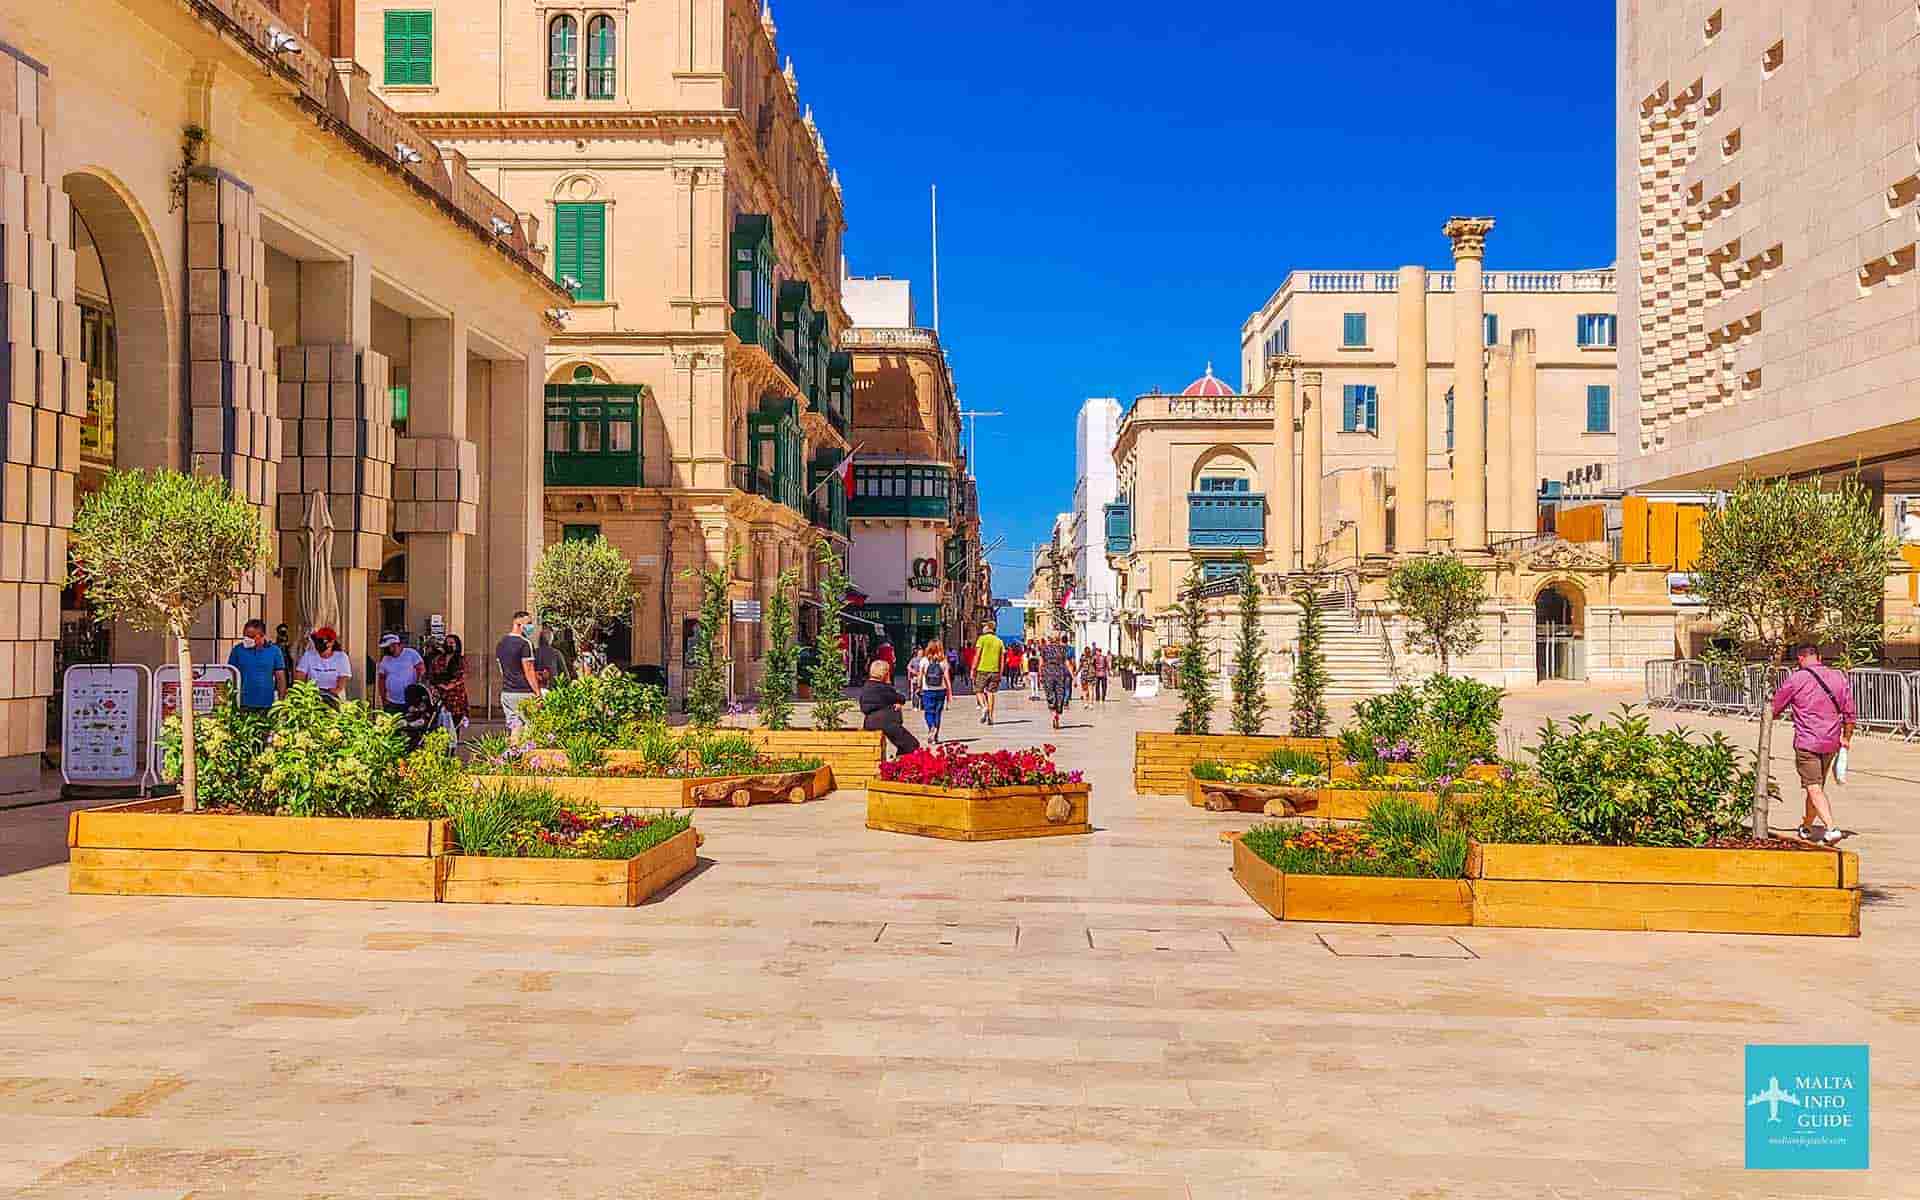 Pots of flowers at the entrance of Malta Valletta.